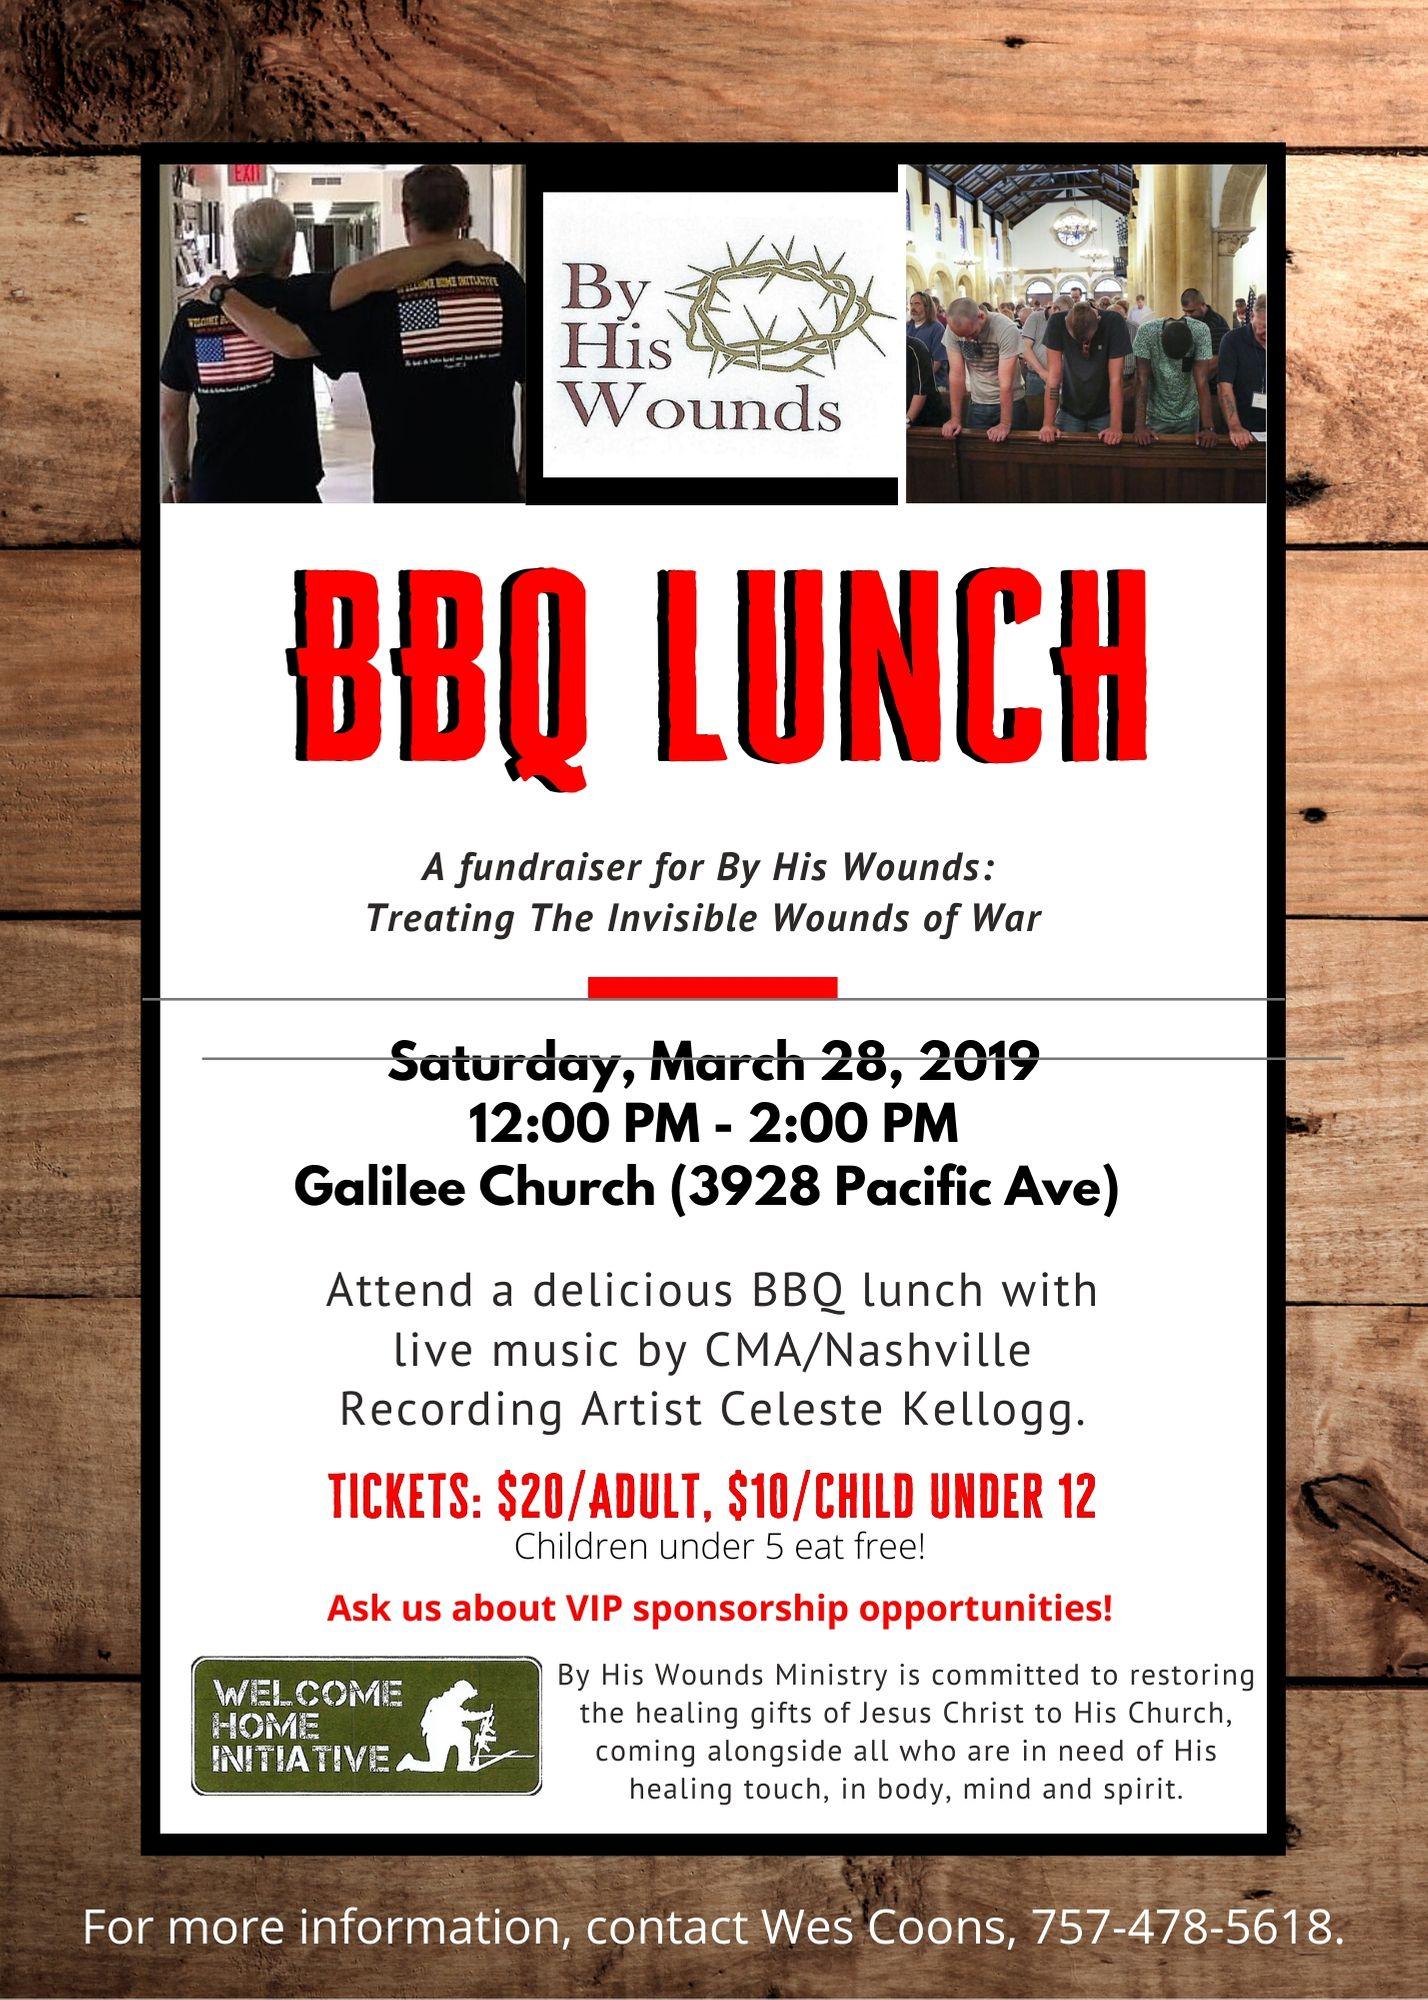 BBQ Lunch - A Fundraiser for By His Wounds